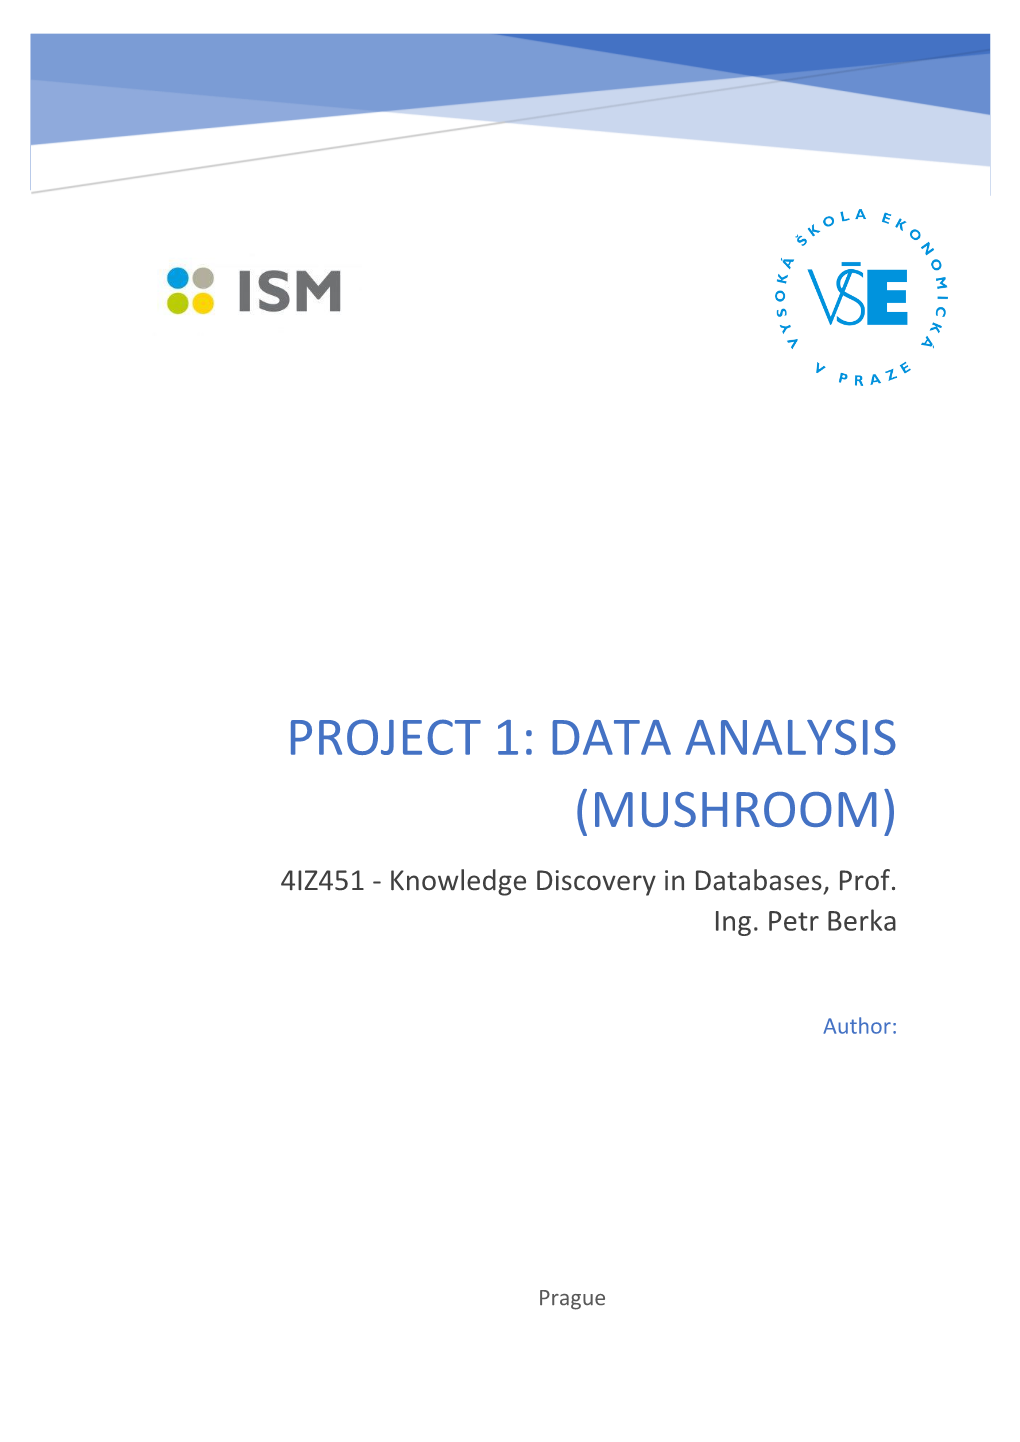 PROJECT 1: DATA ANALYSIS (MUSHROOM) 4IZ451 - Knowledge Discovery in Databases, Prof